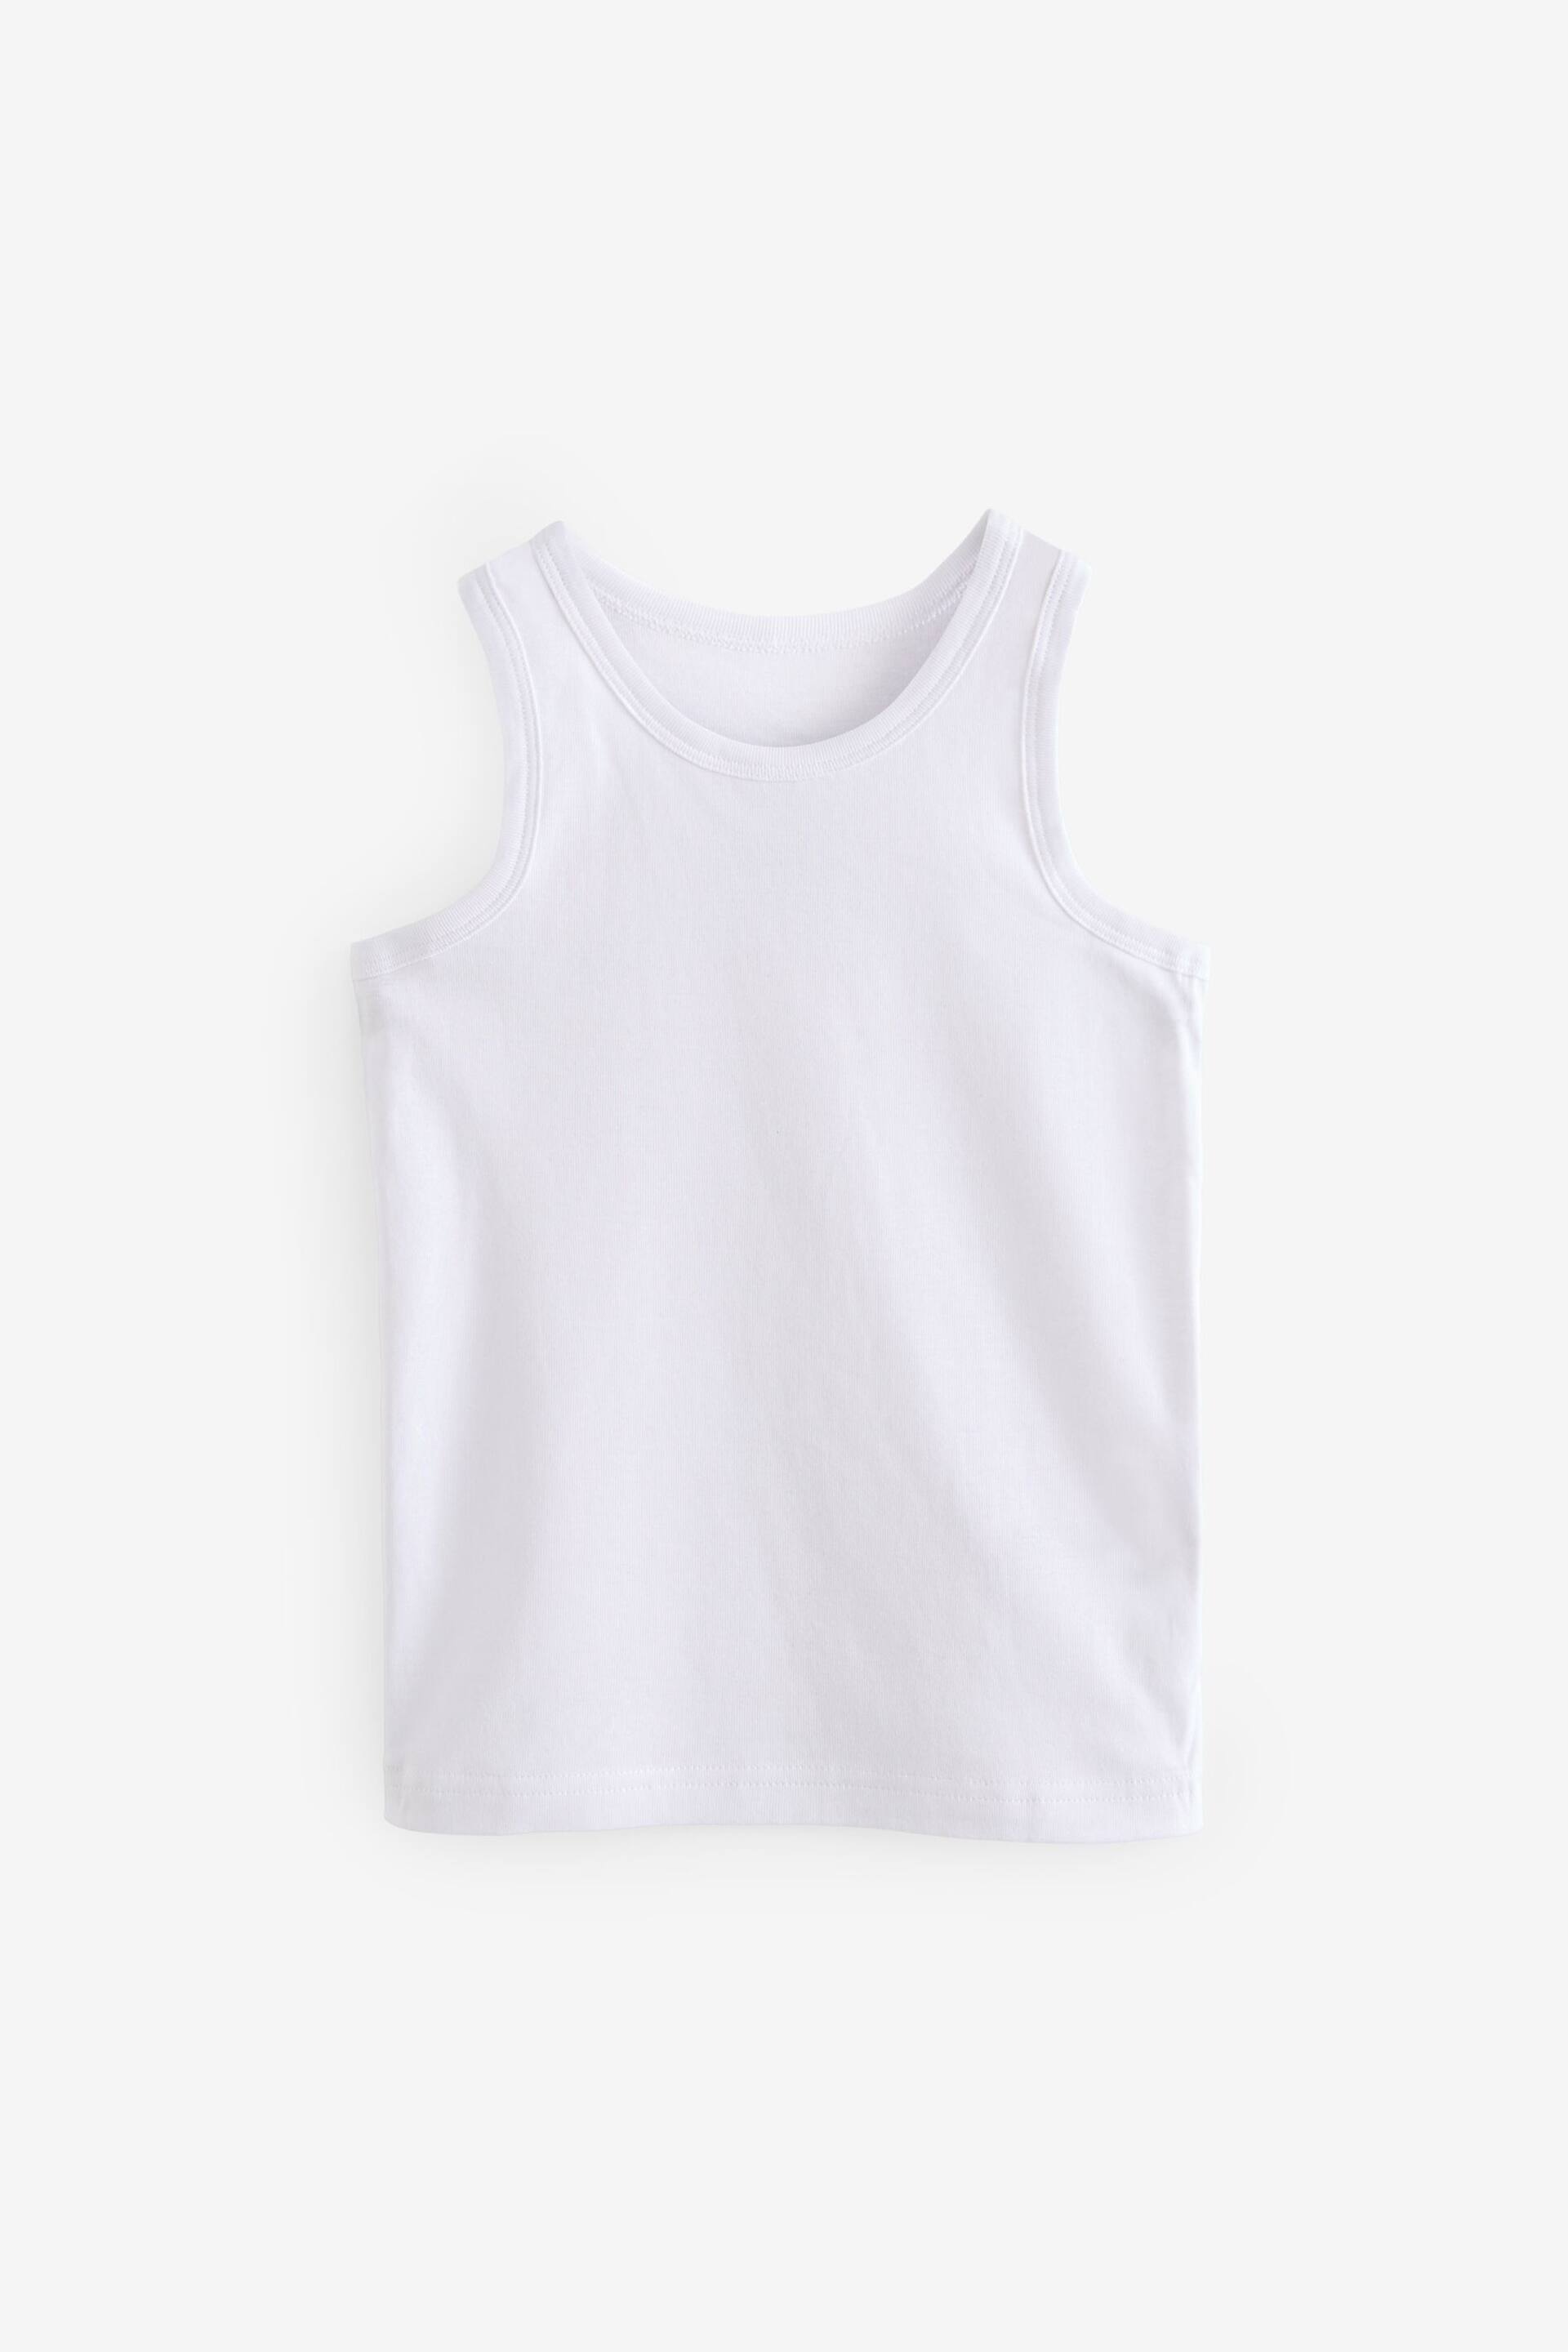 Grey Organic Cotton Vests 5 Pack (1.5-16yrs) - Image 3 of 8